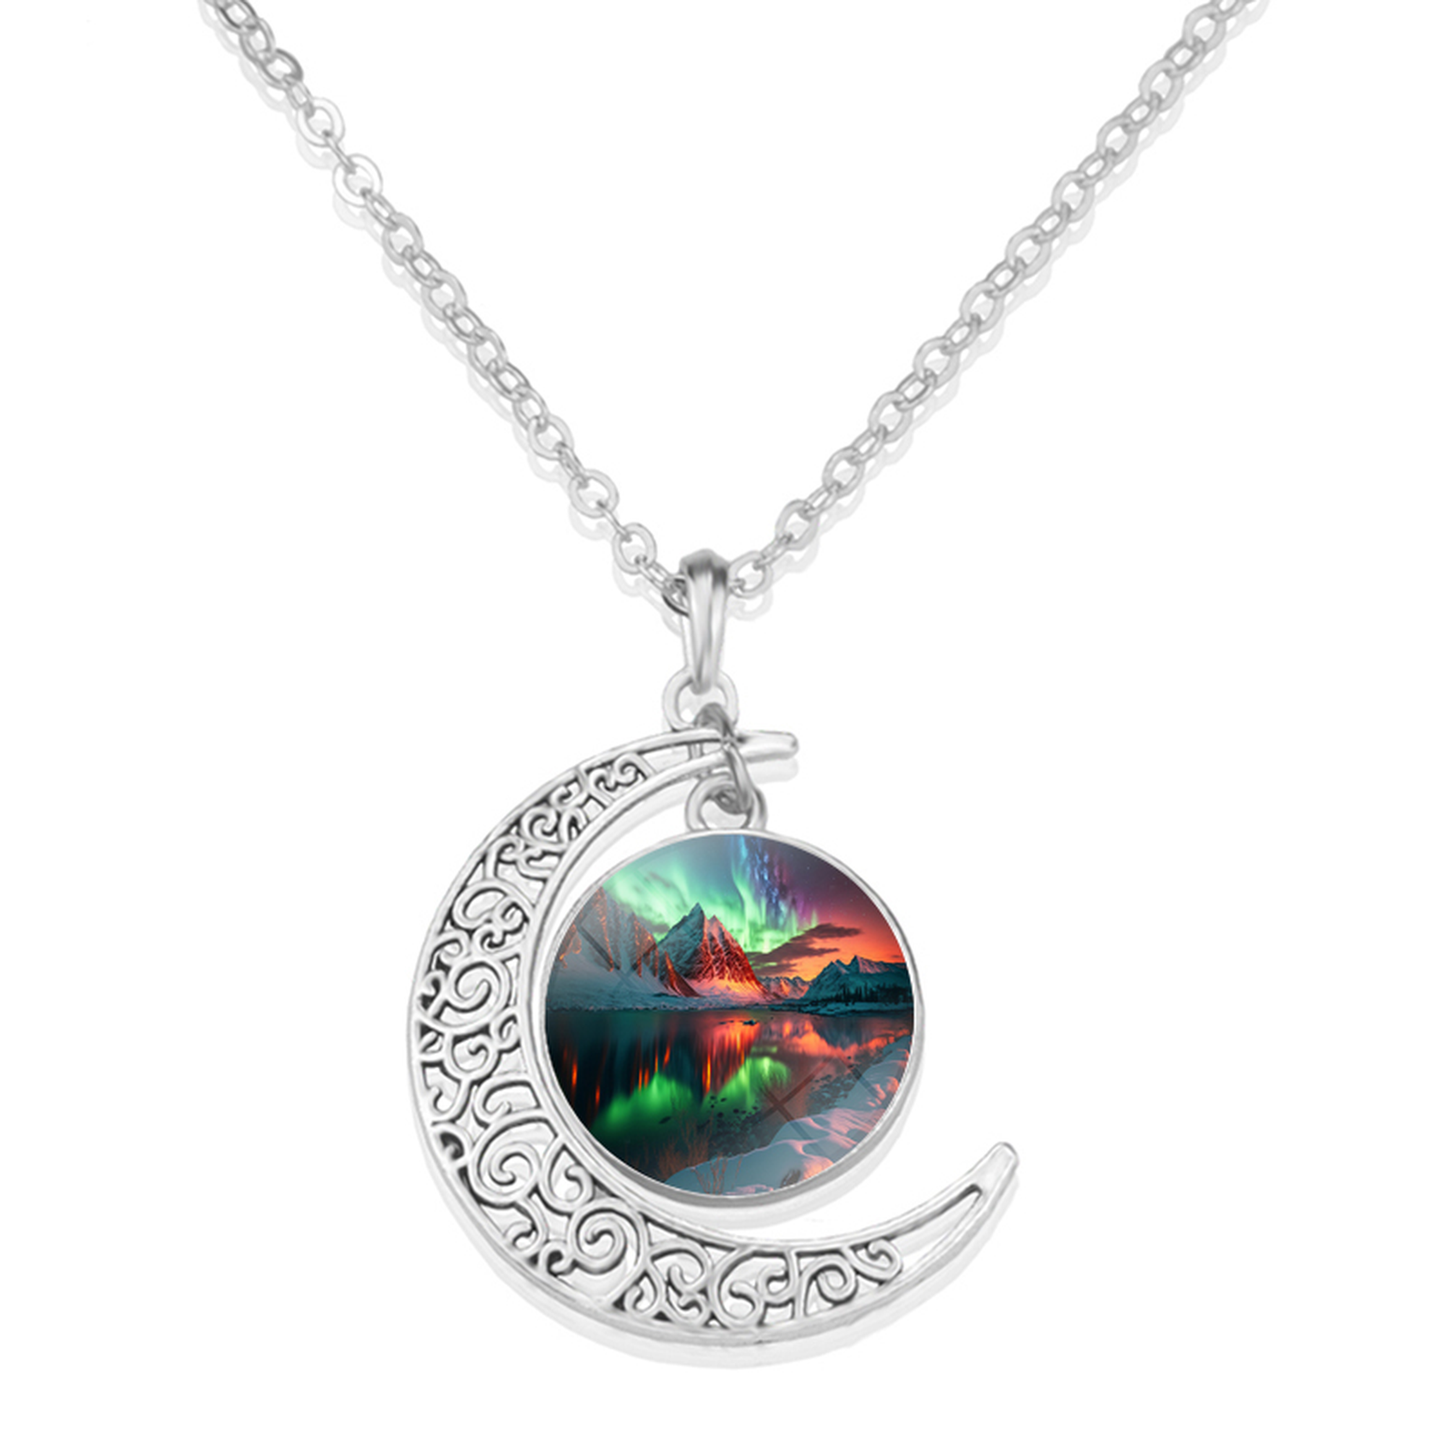 Unique Aurora Borealis Crescent Necklace - Northern Light Jewelry - Crescent Glass Cabochon Pendent Necklace - Perfect Aurora Lovers Gift 6